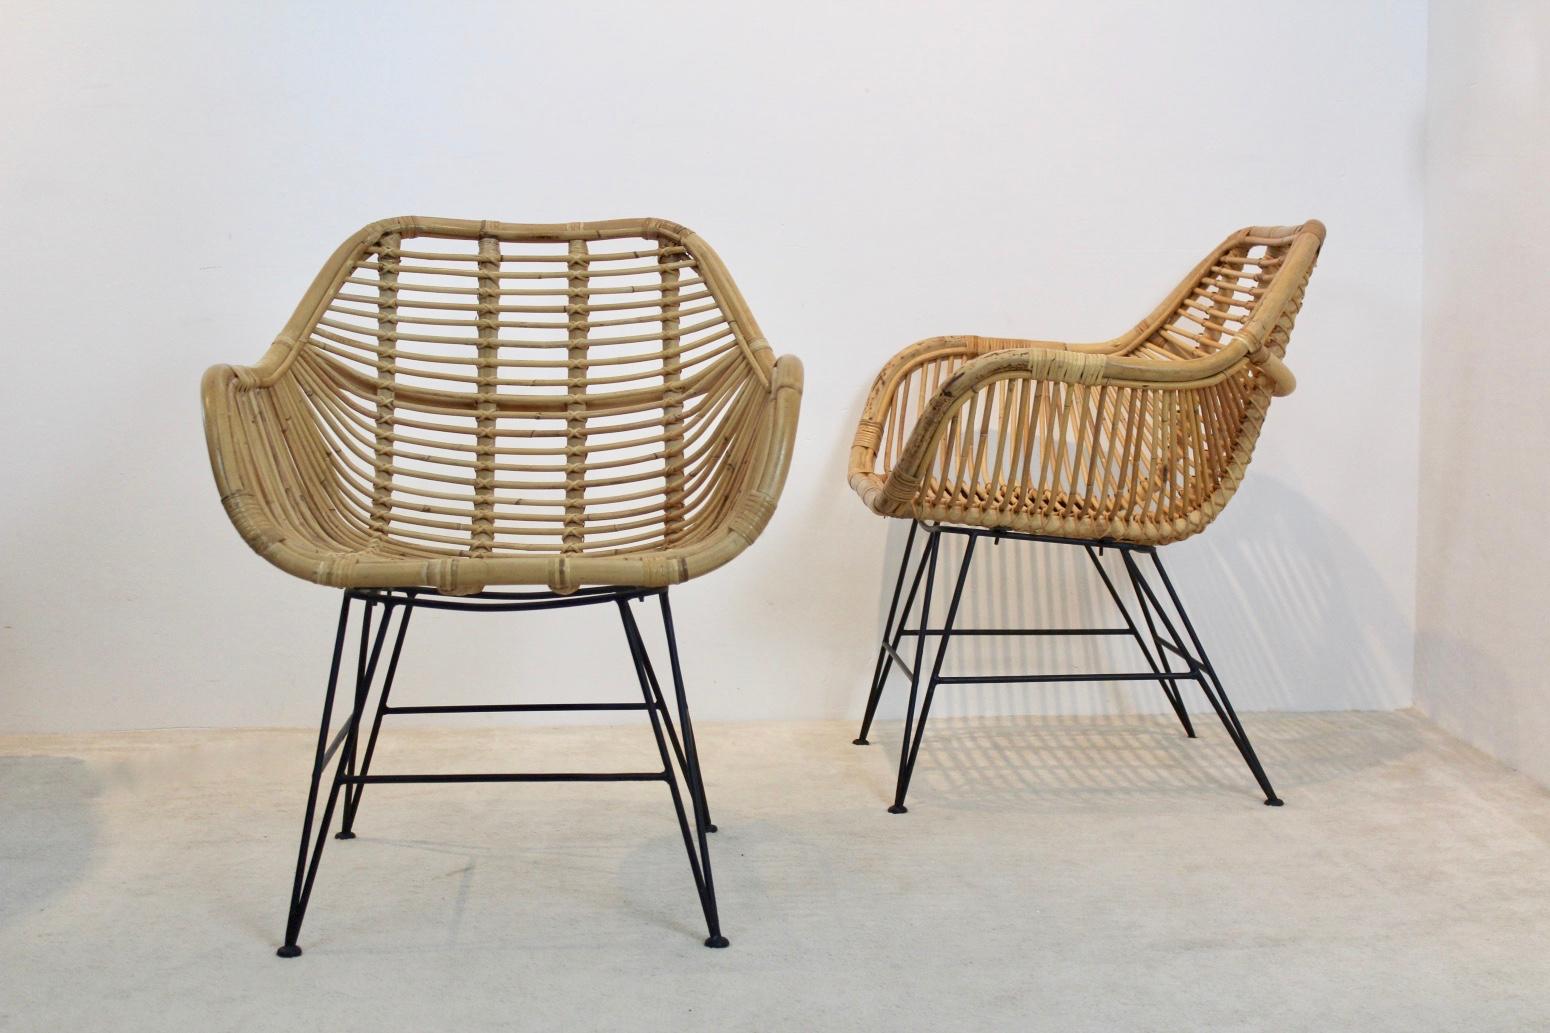 Beautiful set of two Wicker chairs with a sophisticated steel base, produced in the Netherlands. The chairs feature beautifully designed rattan with linear detailing in the style of Franco Albini. Very good original condition.